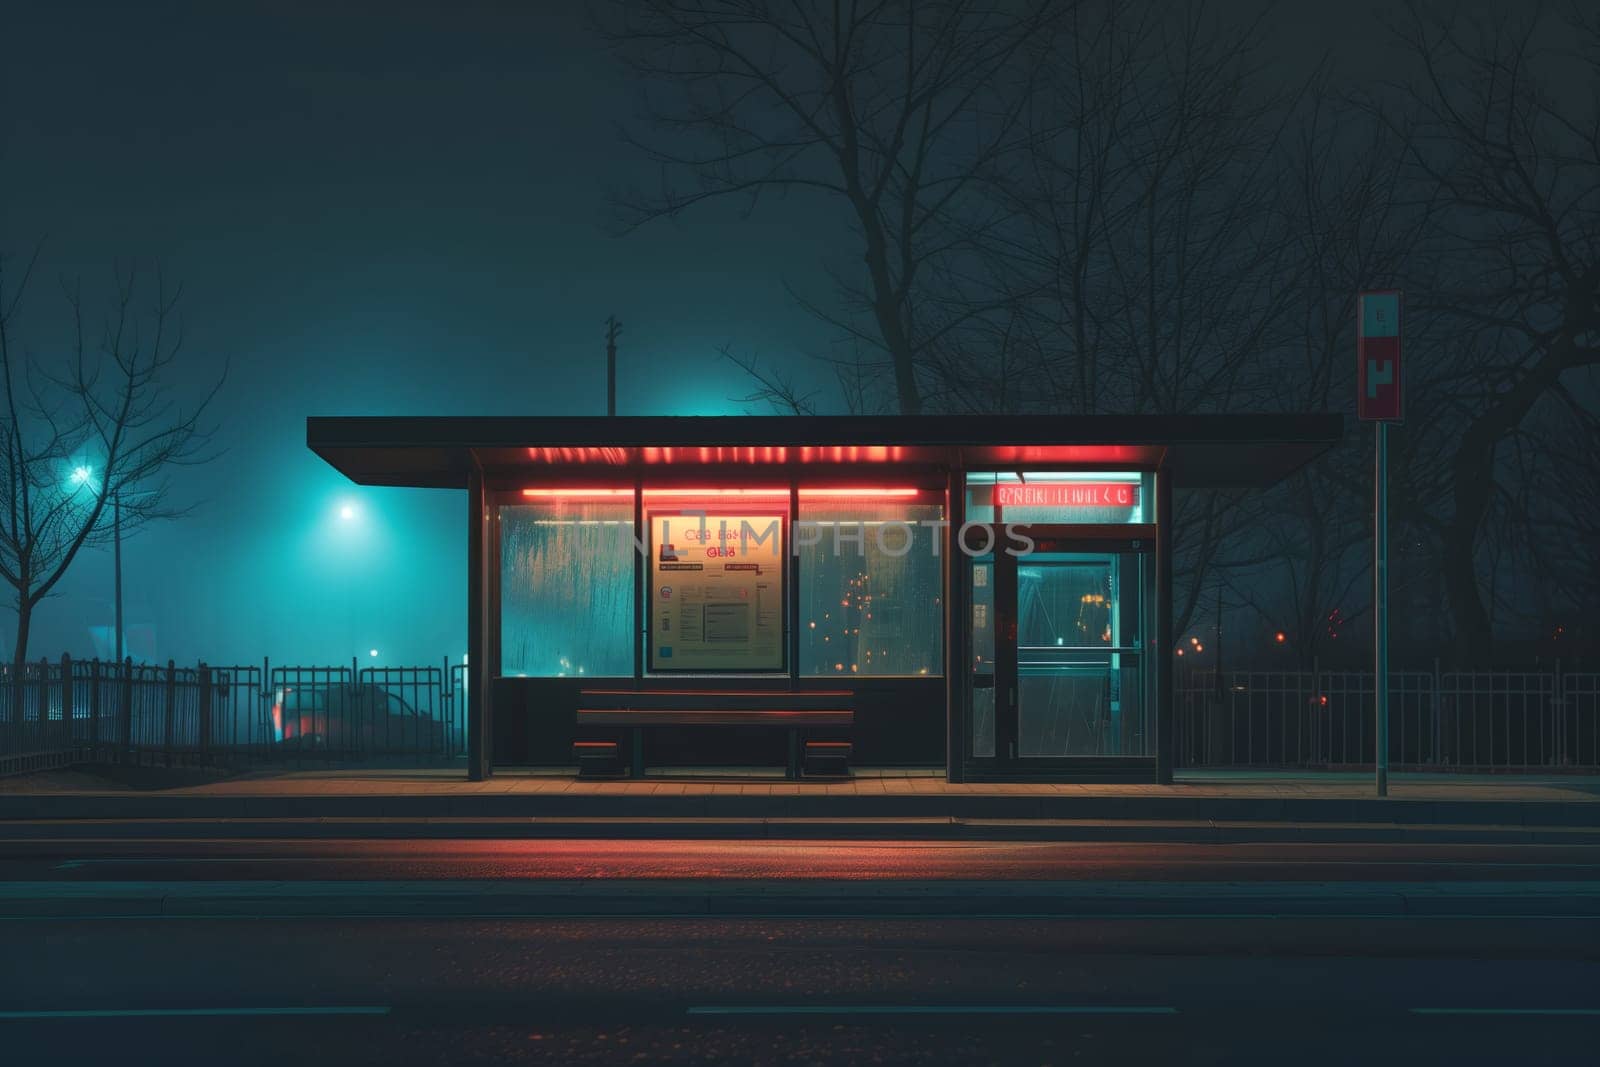 A bus stop at midnight, bathed in electric blue light with a bench in front by richwolf